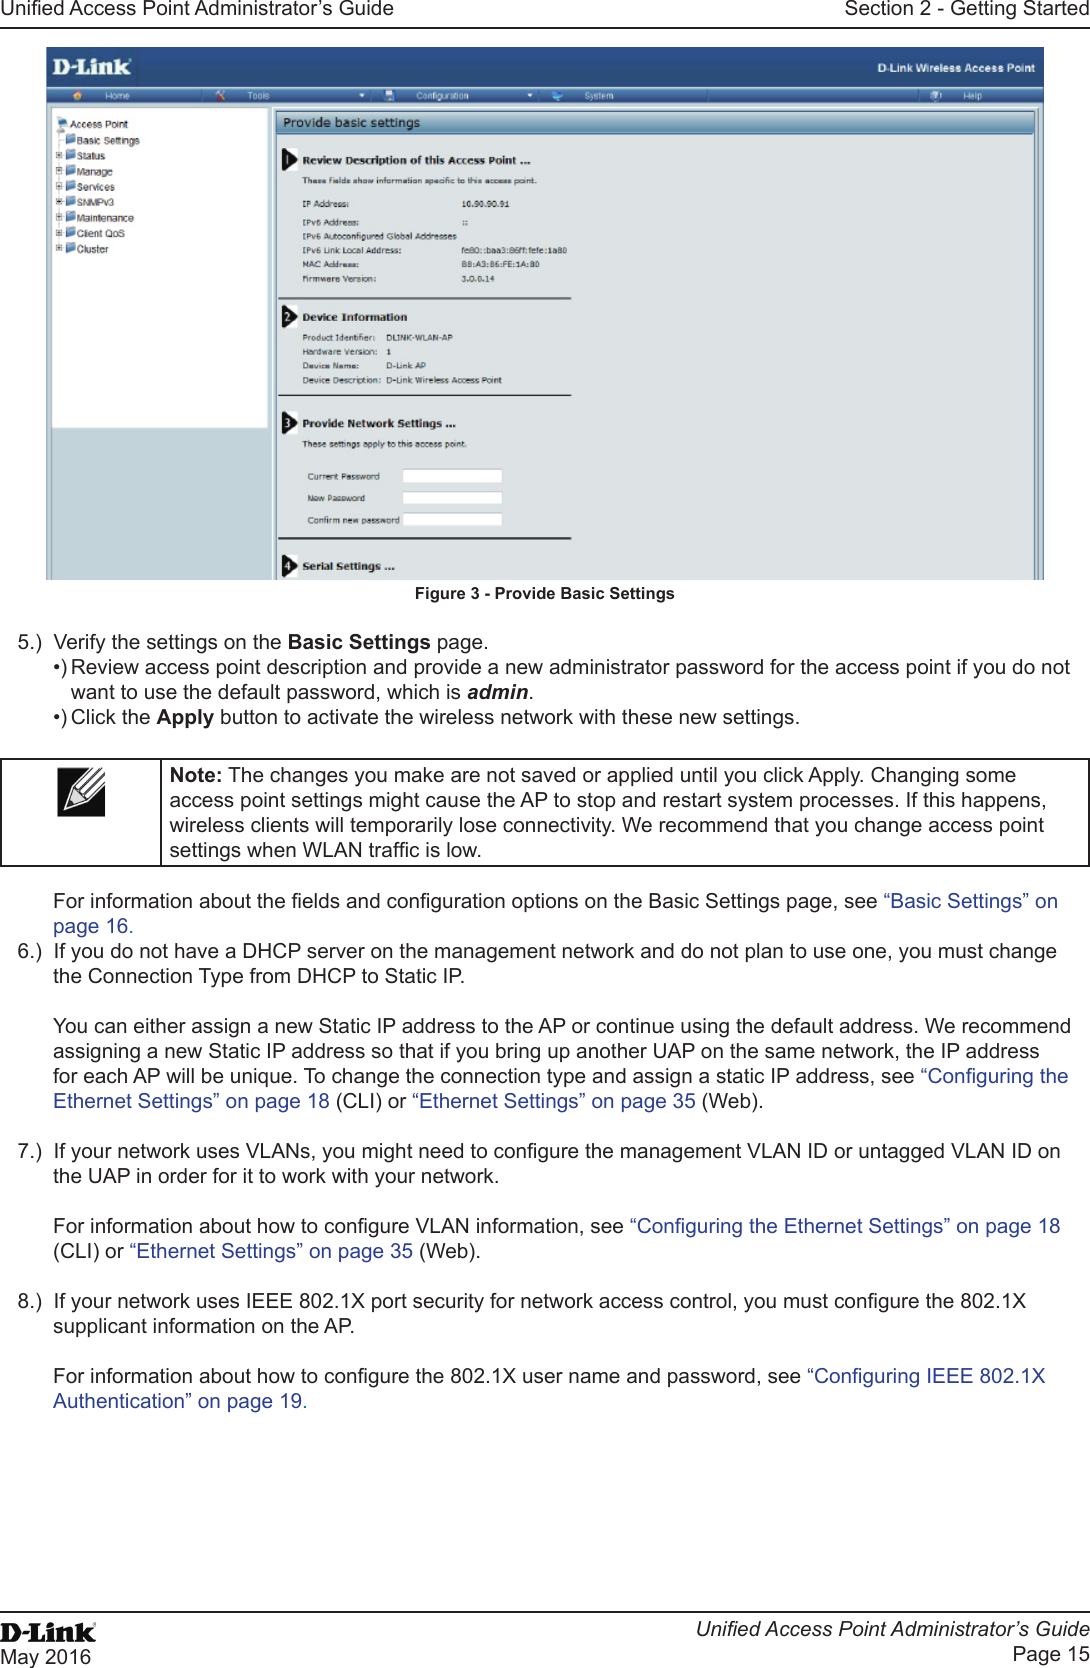 Unied Access Point Administrator’s GuideUnied Access Point Administrator’s GuidePage 15May 2016Section 2 - Getting StartedFigure 3 - Provide Basic Settings5.)  Verify the settings on the Basic Settings page.•) Review access point description and provide a new administrator password for the access point if you do not want to use the default password, which is admin.•) Click the Apply button to activate the wireless network with these new settings. Note: The changes you make are not saved or applied until you click Apply. Changing some access point settings might cause the AP to stop and restart system processes. If this happens, wireless clients will temporarily lose connectivity. We recommend that you change access point settings when WLAN trafc is low. For information about the elds and conguration options on the Basic Settings page, see “Basic Settings” on page 16.6.)  If you do not have a DHCP server on the management network and do not plan to use one, you must change the Connection Type from DHCP to Static IP. You can either assign a new Static IP address to the AP or continue using the default address. We recommend assigning a new Static IP address so that if you bring up another UAP on the same network, the IP address for each AP will be unique. To change the connection type and assign a static IP address, see “Conguring the Ethernet Settings” on page 18 (CLI) or “Ethernet Settings” on page 35 (Web).7.)  If your network uses VLANs, you might need to congure the management VLAN ID or untagged VLAN ID on the UAP in order for it to work with your network. For information about how to congure VLAN information, see “Conguring the Ethernet Settings” on page 18 (CLI) or “Ethernet Settings” on page 35 (Web).8.)  If your network uses IEEE 802.1X port security for network access control, you must congure the 802.1X supplicant information on the AP.For information about how to congure the 802.1X user name and password, see “Conguring IEEE 802.1X Authentication” on page 19.